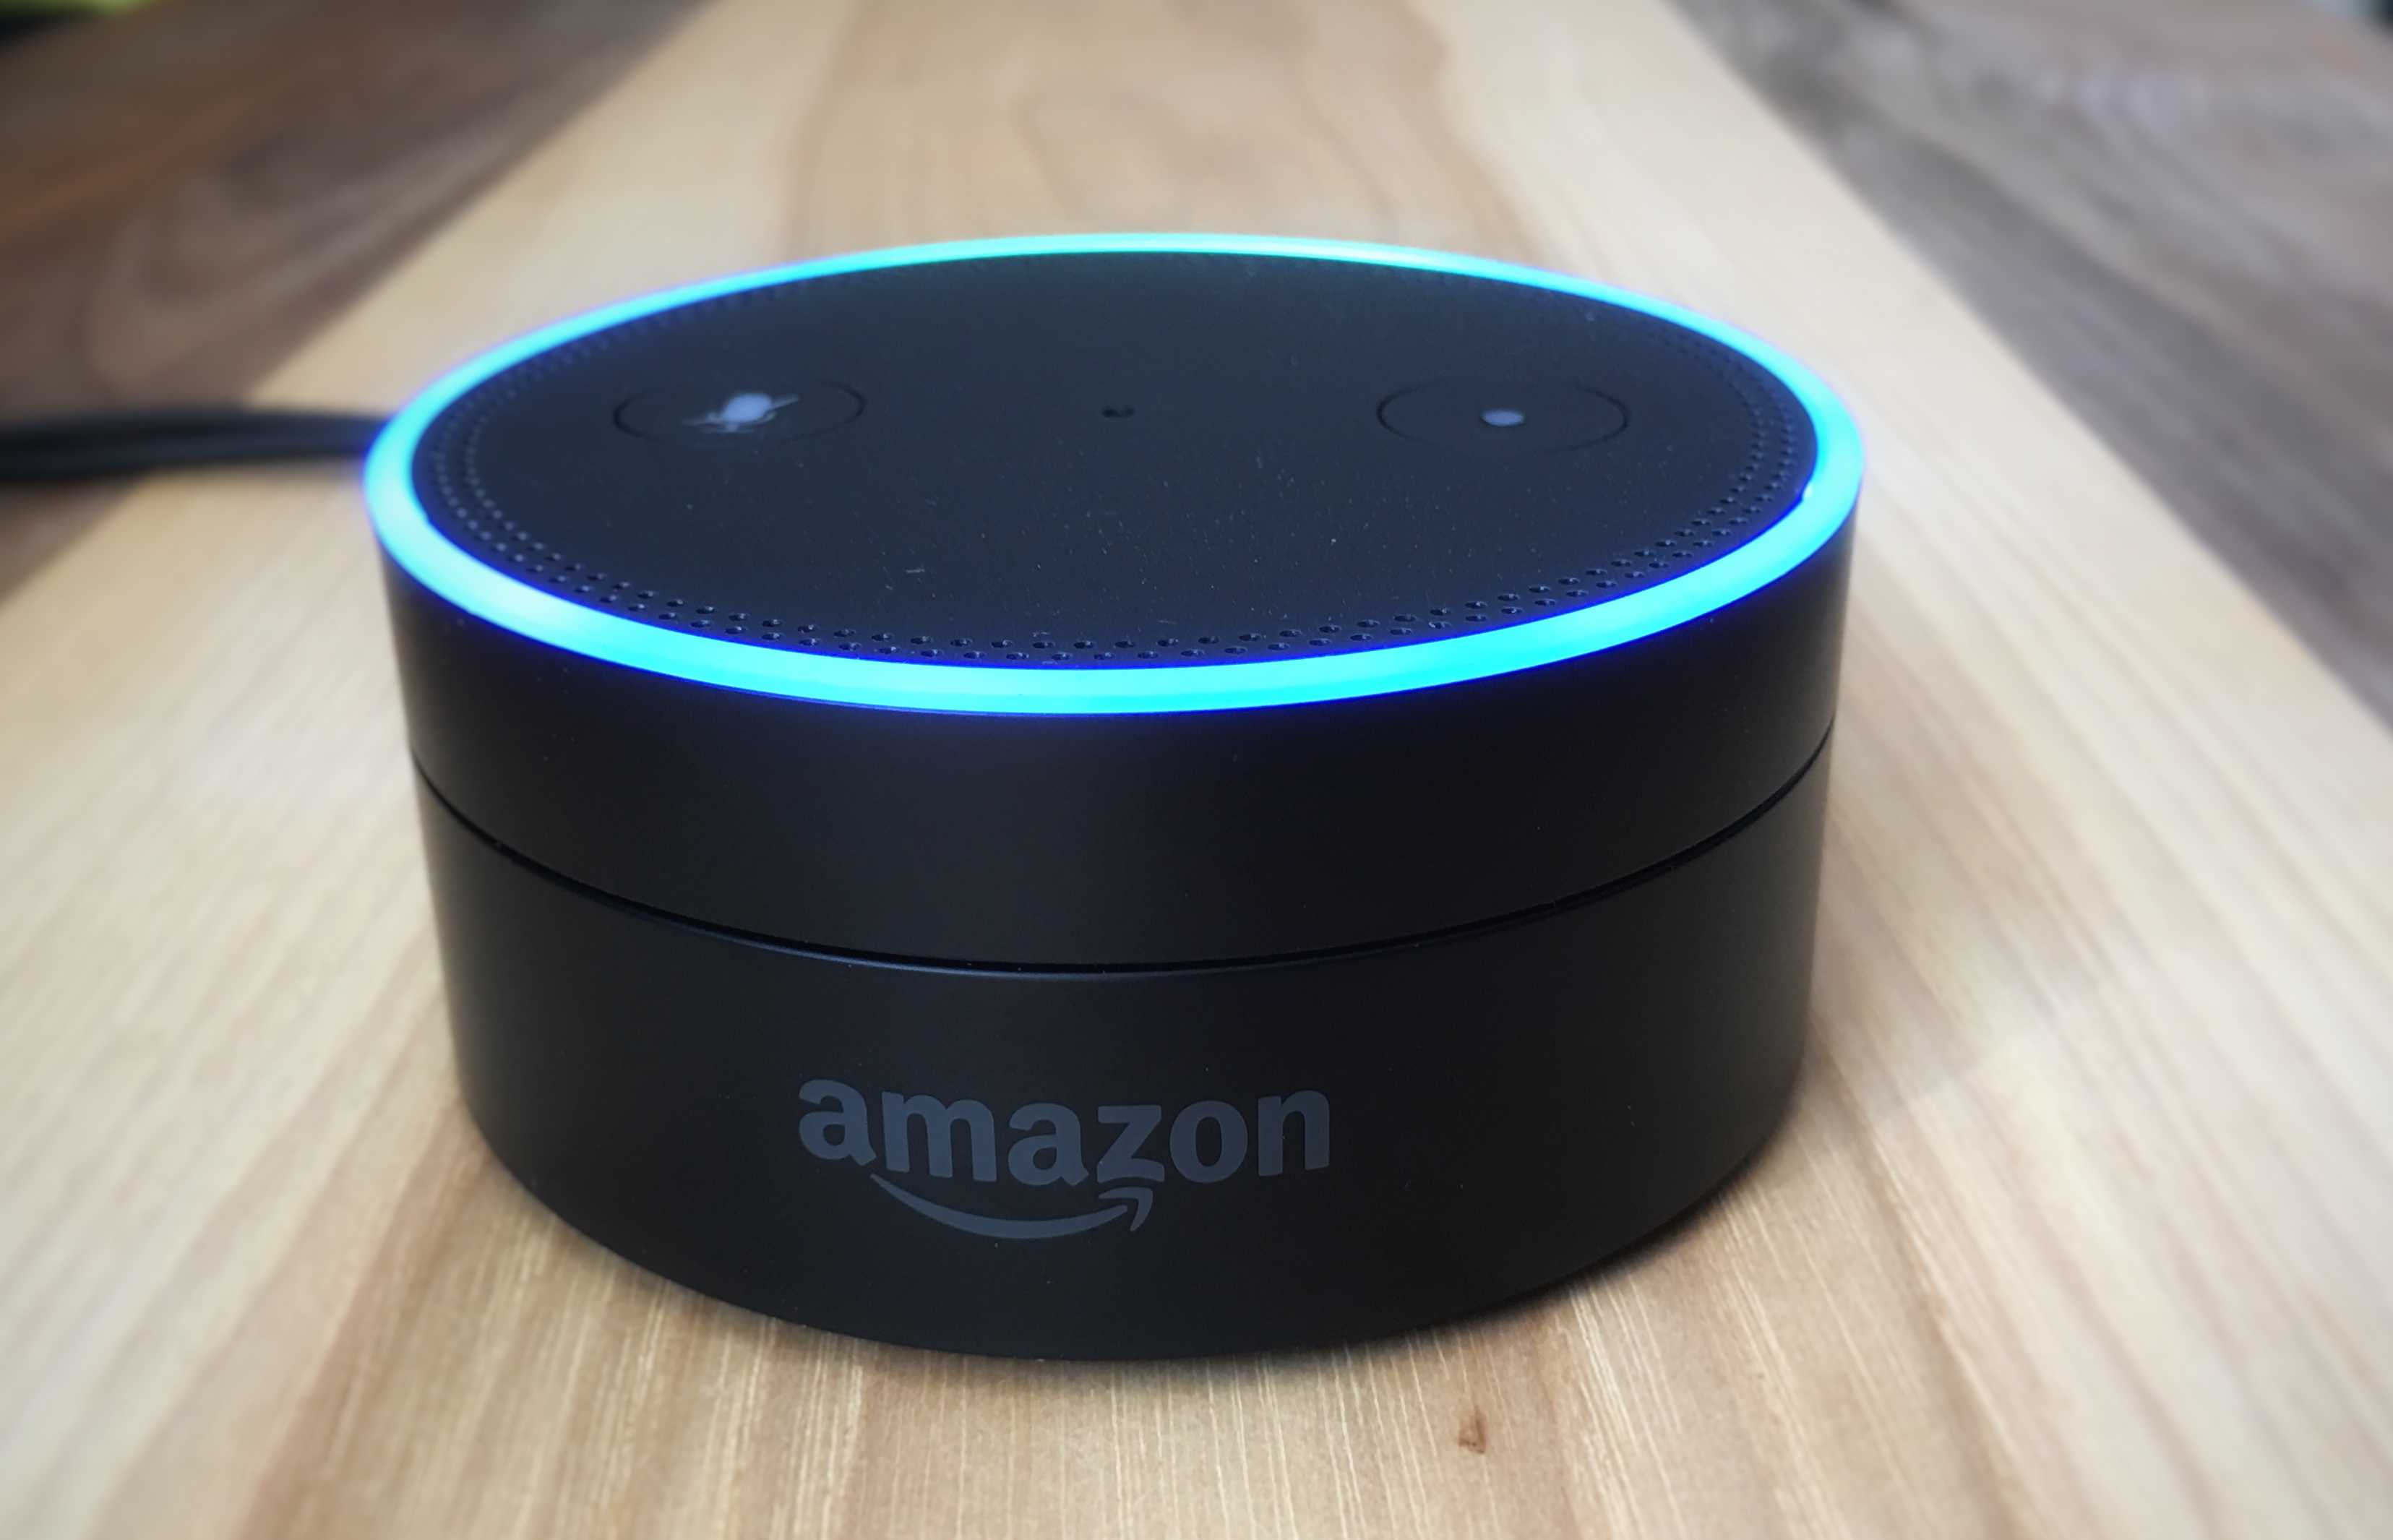 Users report Alexa is creeping them out by laughing randomly